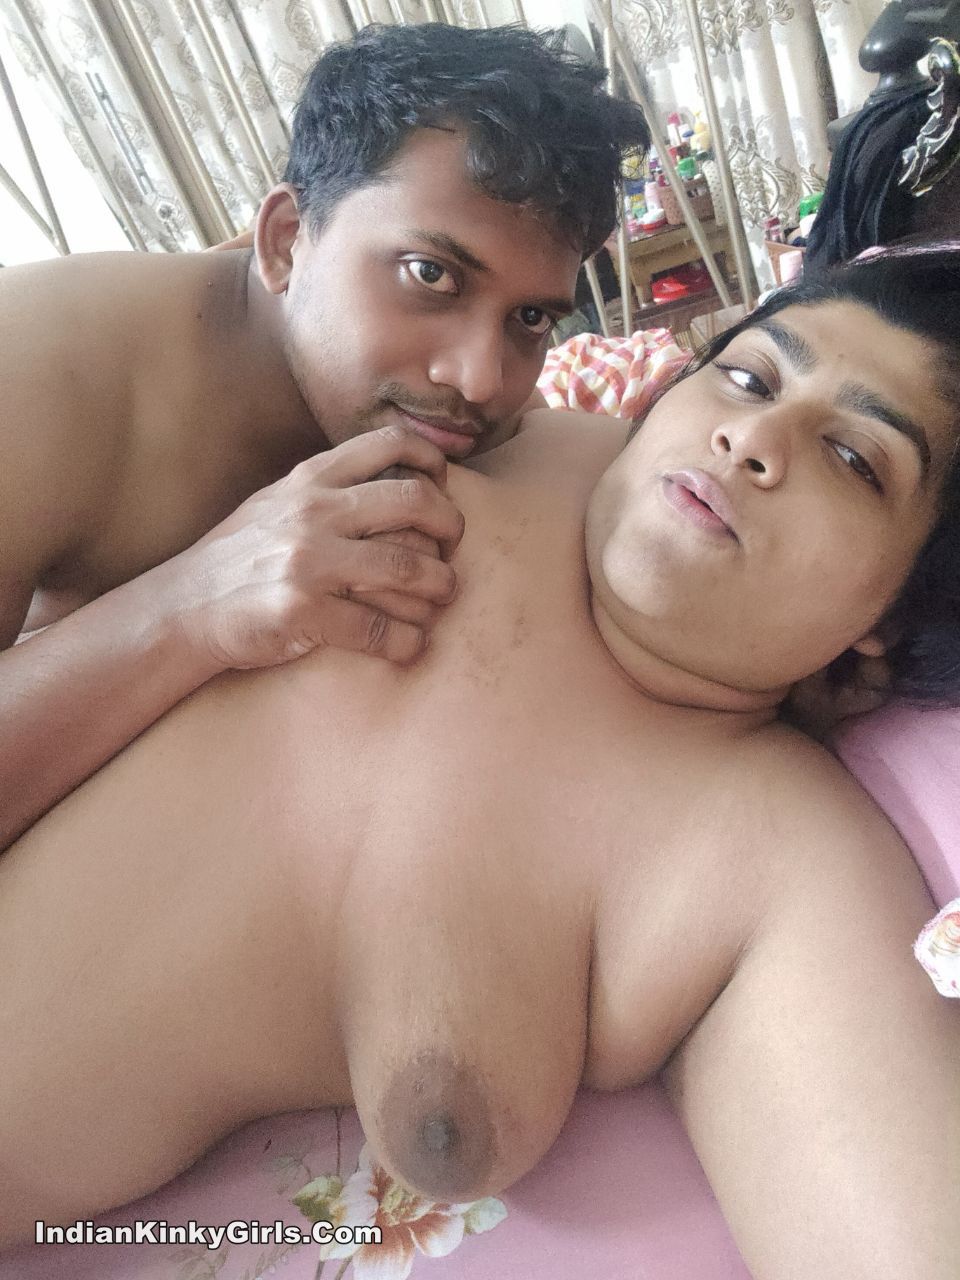 Indian Husband Enjoying Sex With Sister-In-Law pic